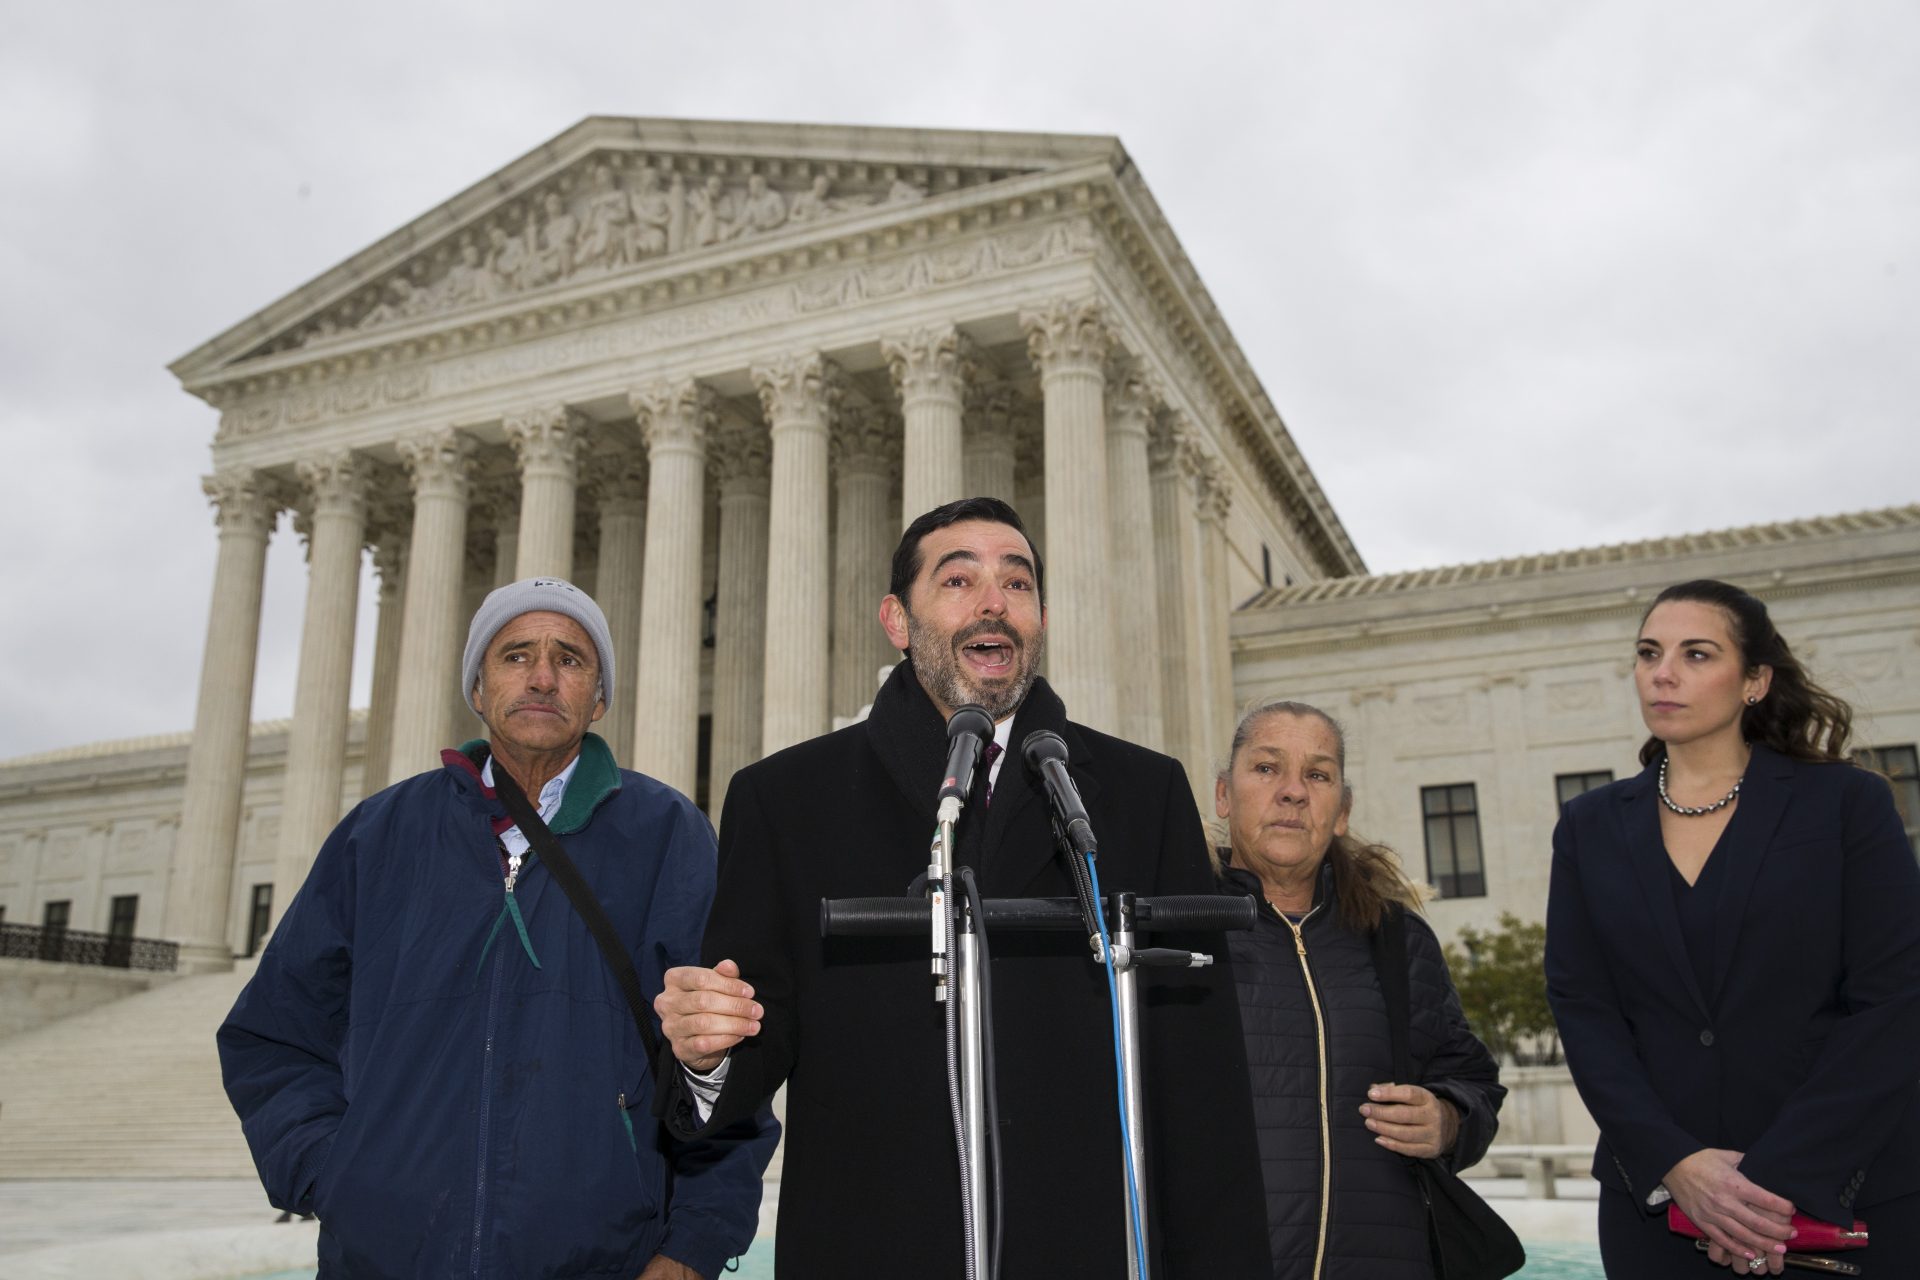 Attorney Cristobal Galindo, second from left, speaks accompanied by Jesus Hernandez, left, and Maria Guereca, and attorney Marion Reilly after oral arguments in front of the Supreme Court, Tuesday, Nov. 12, 2019 in Washington. The case involves U.S. border patrol agent Jesus Mesa, Jr., who fired at least two shots across the Mexican border, killing Sergio Adrian Hernandez Guereca, 15, who'd been playing in the concrete culvert between El Paso and Cuidad Juarez.